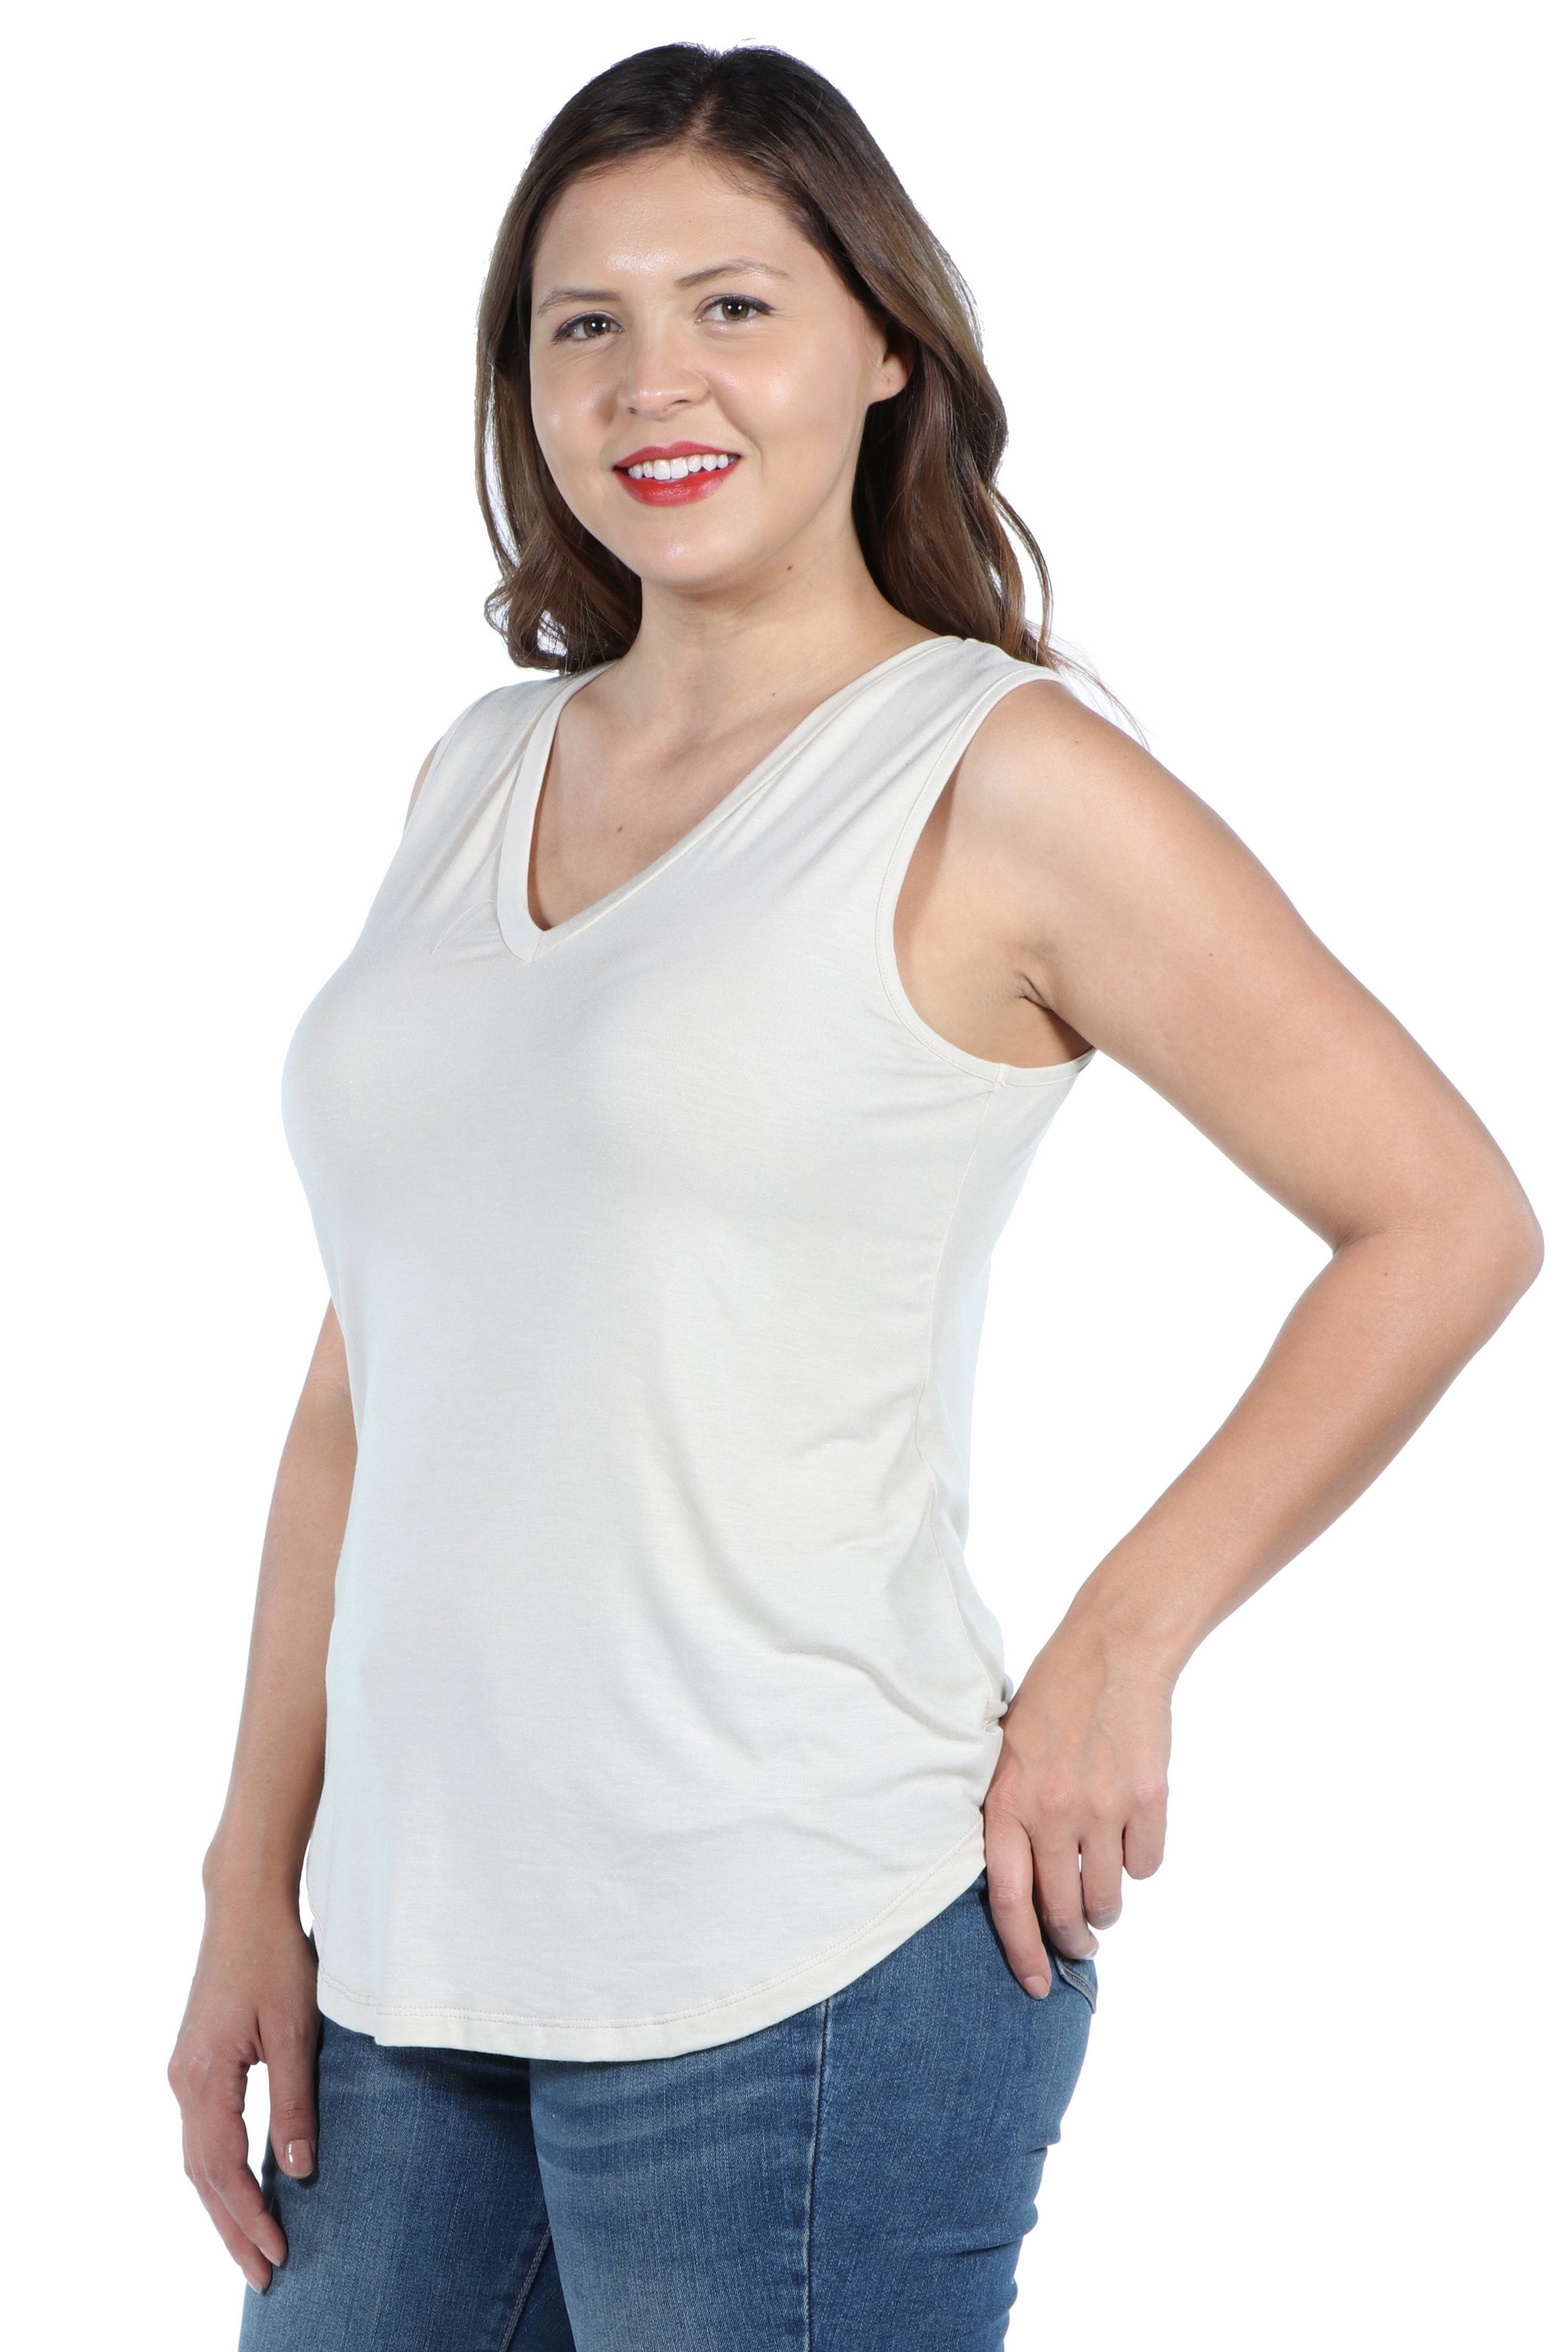 247 Comfort Apparel Womens Plus Size V Neck Sleeveless Rounded